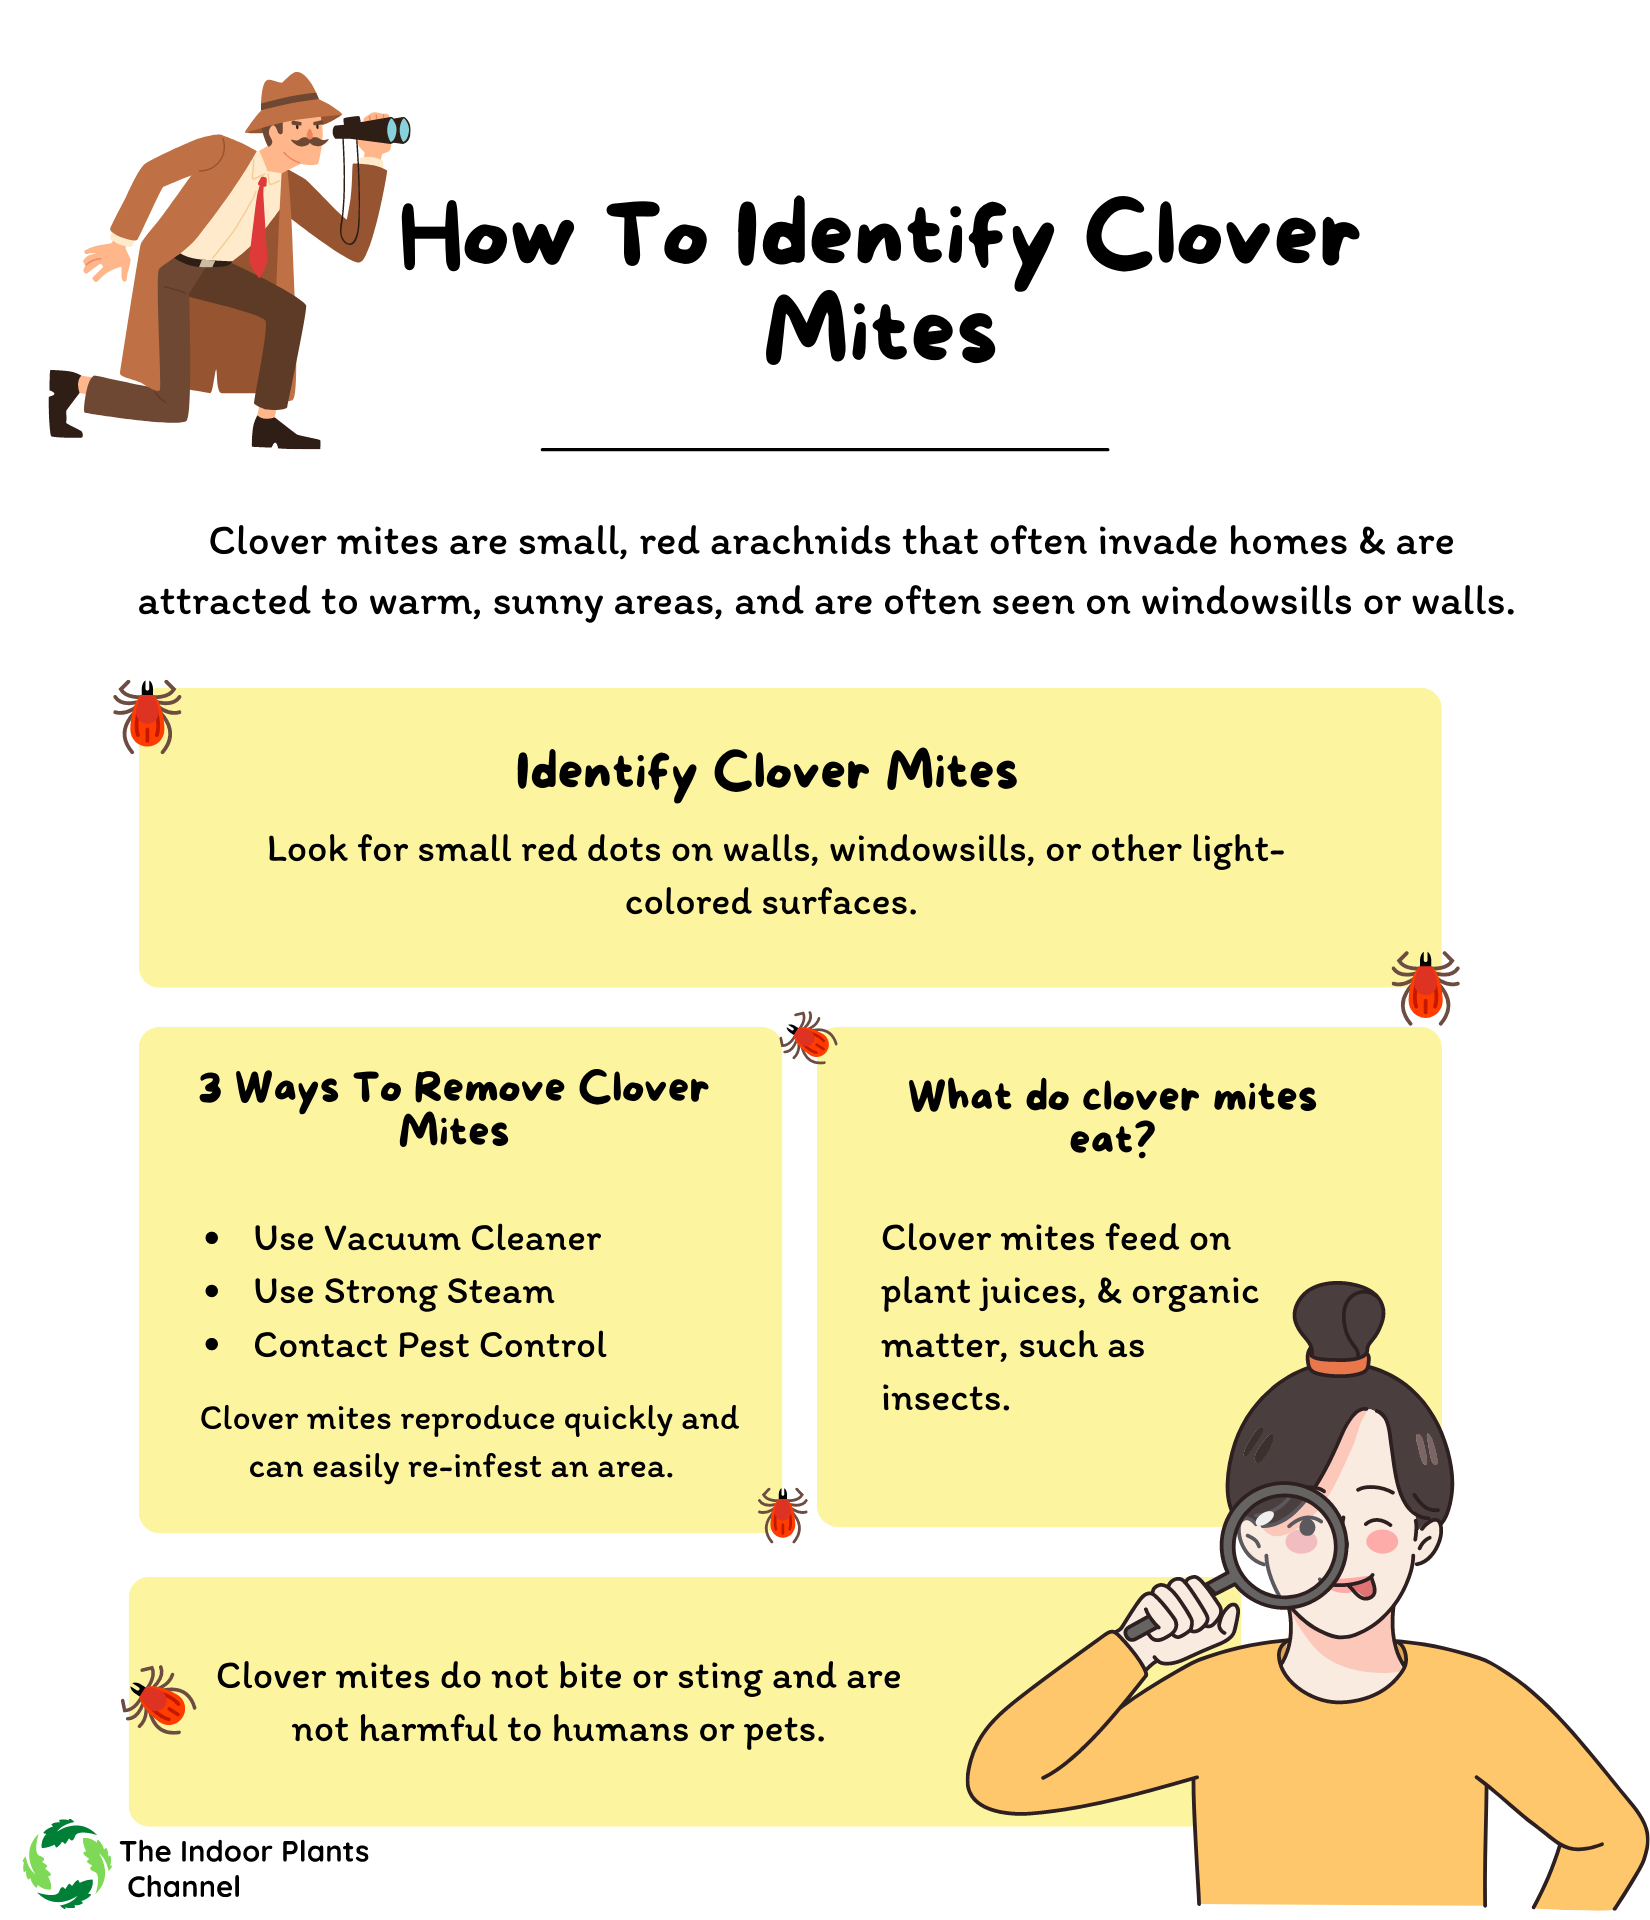 How To Identify Clover Mites